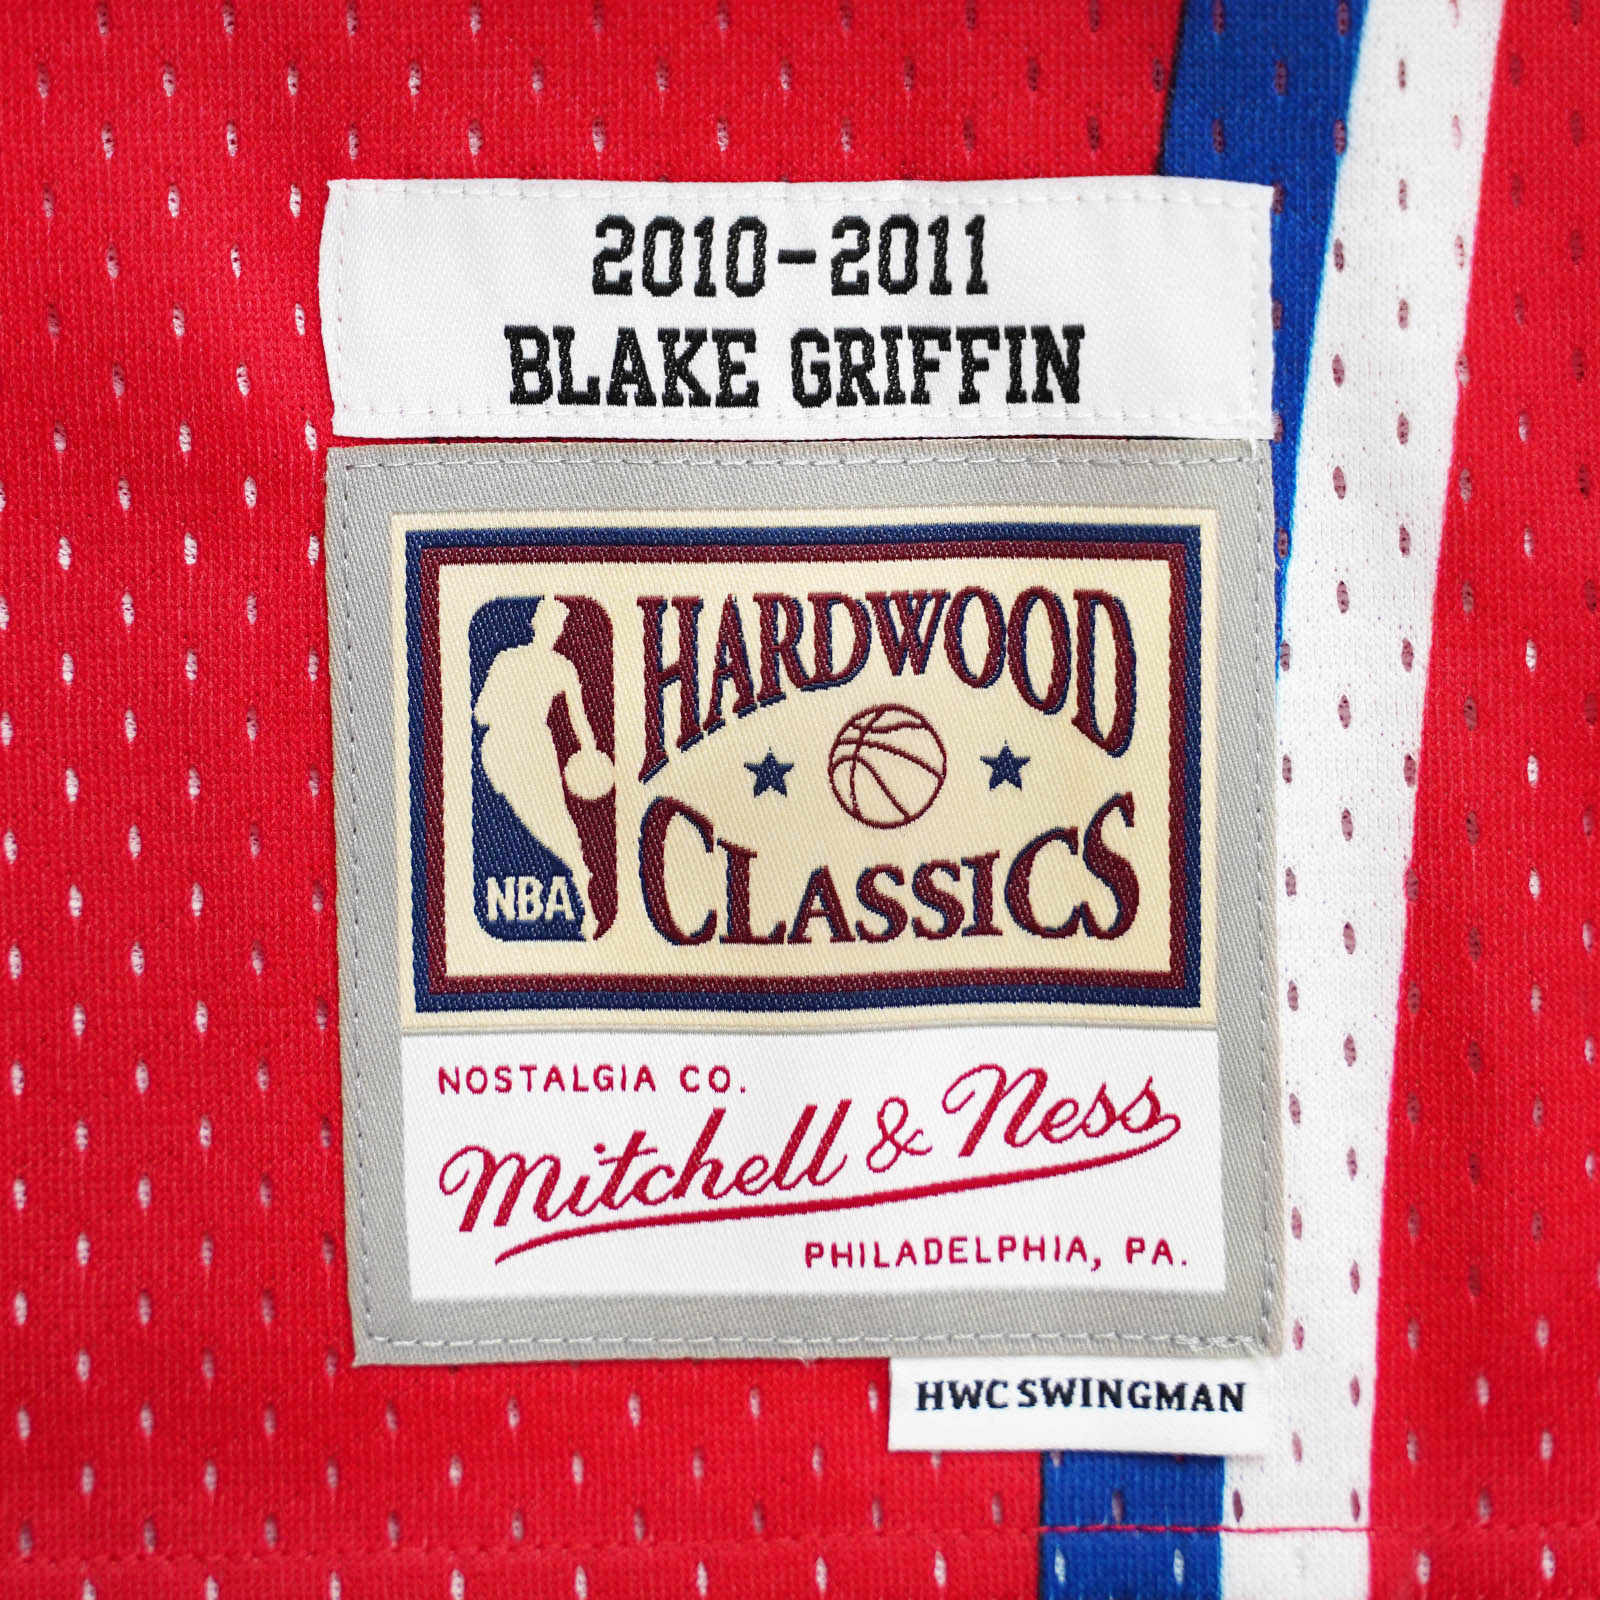 Blake Griffin from Los Angeles Stars Clippers  Los angeles clippers, Hardwood  classic jerseys, Blake griffin